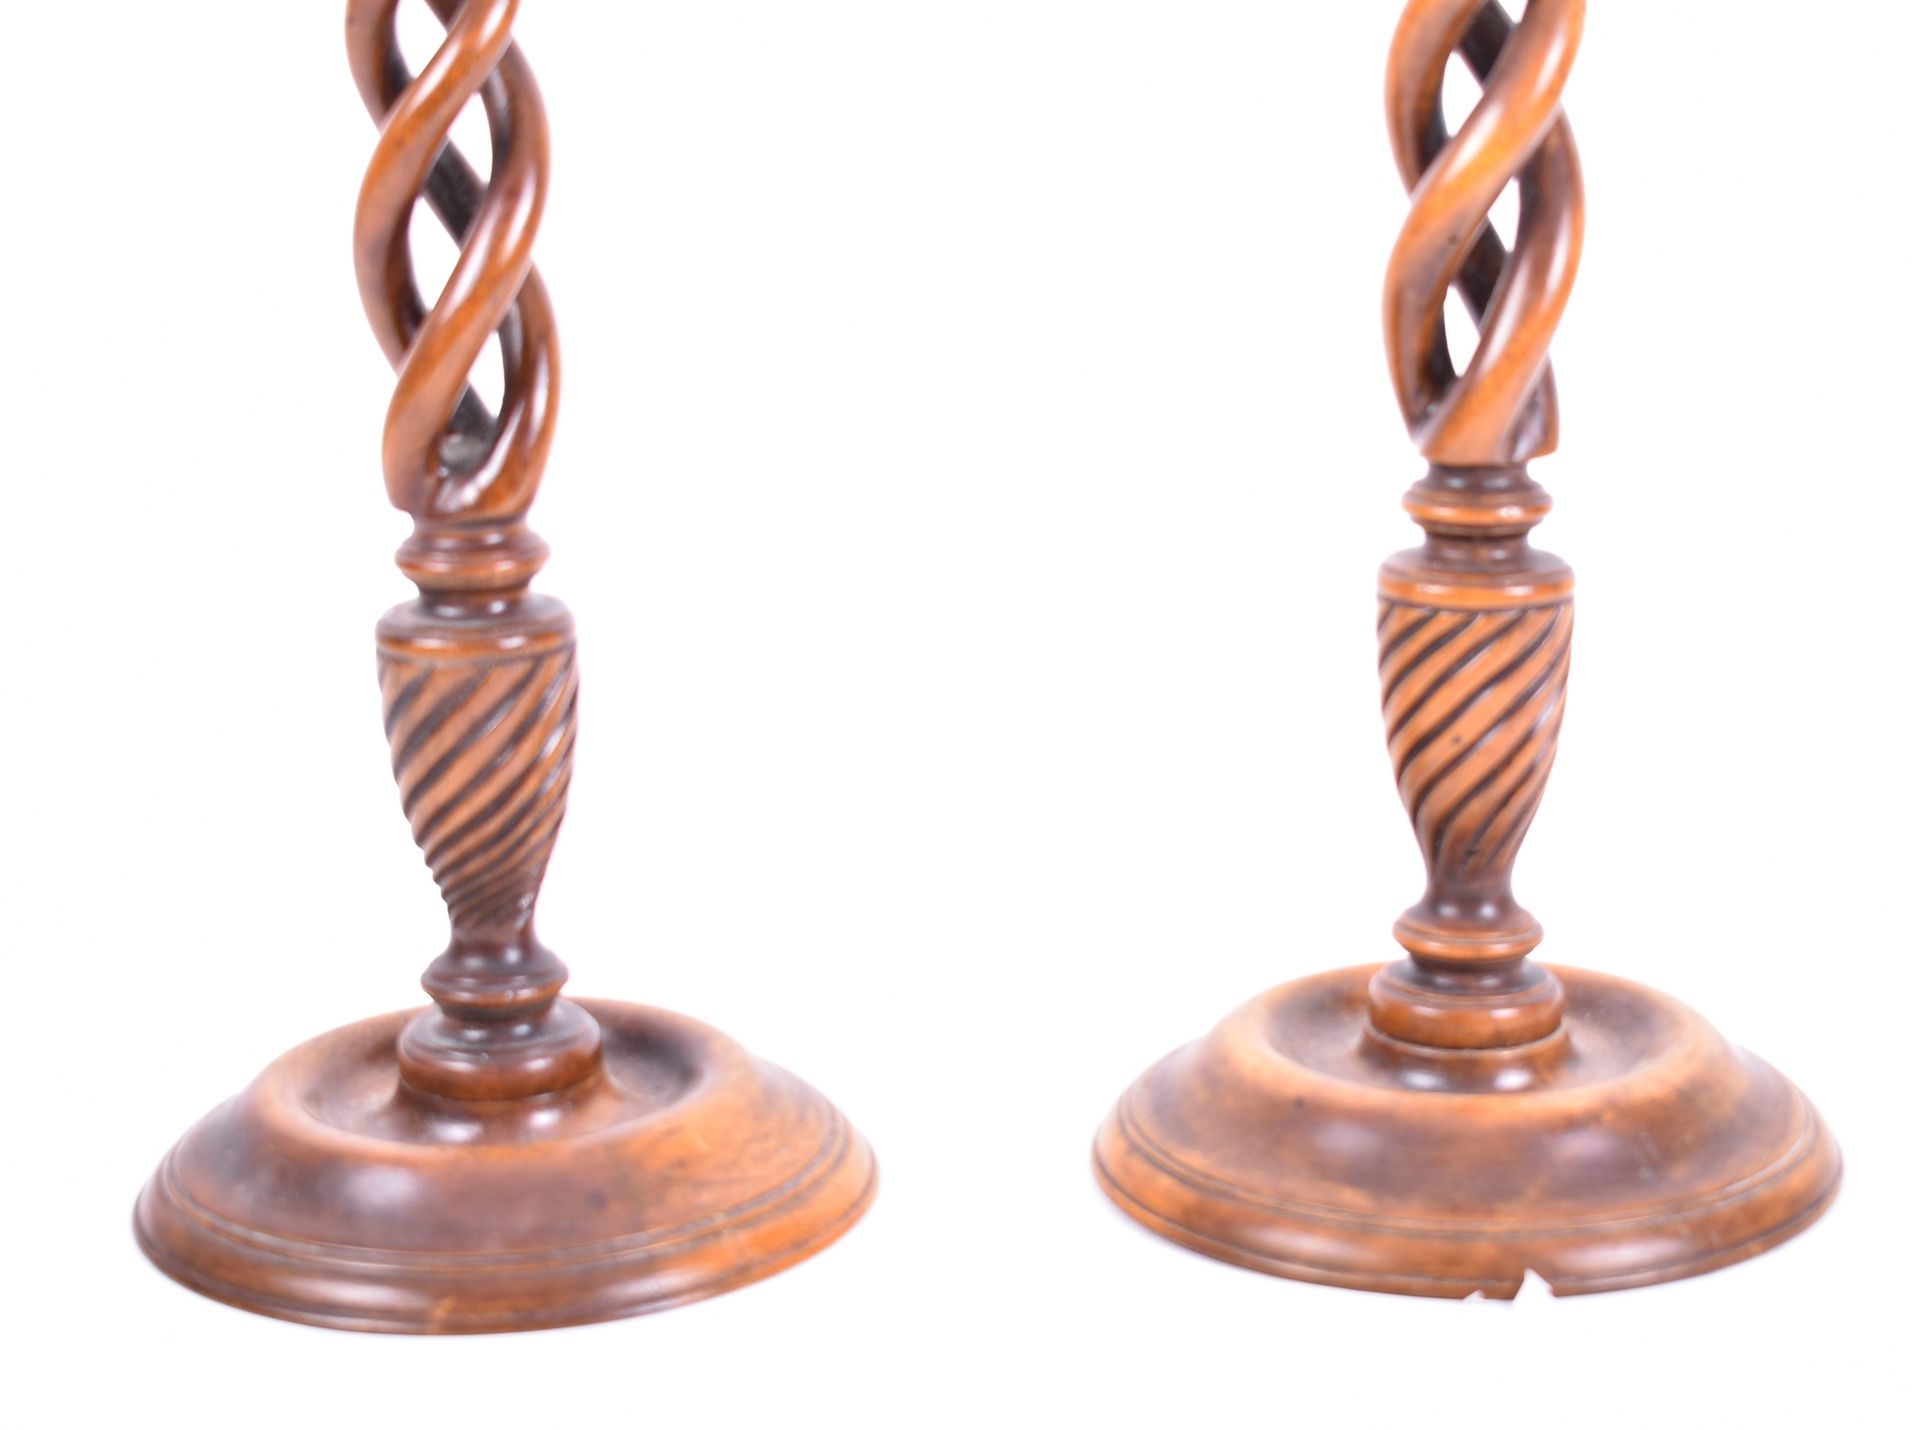 PAIR OF EARLY 20TH CENTURY BARLEY TWIST CANDLESTICKS - Image 4 of 5